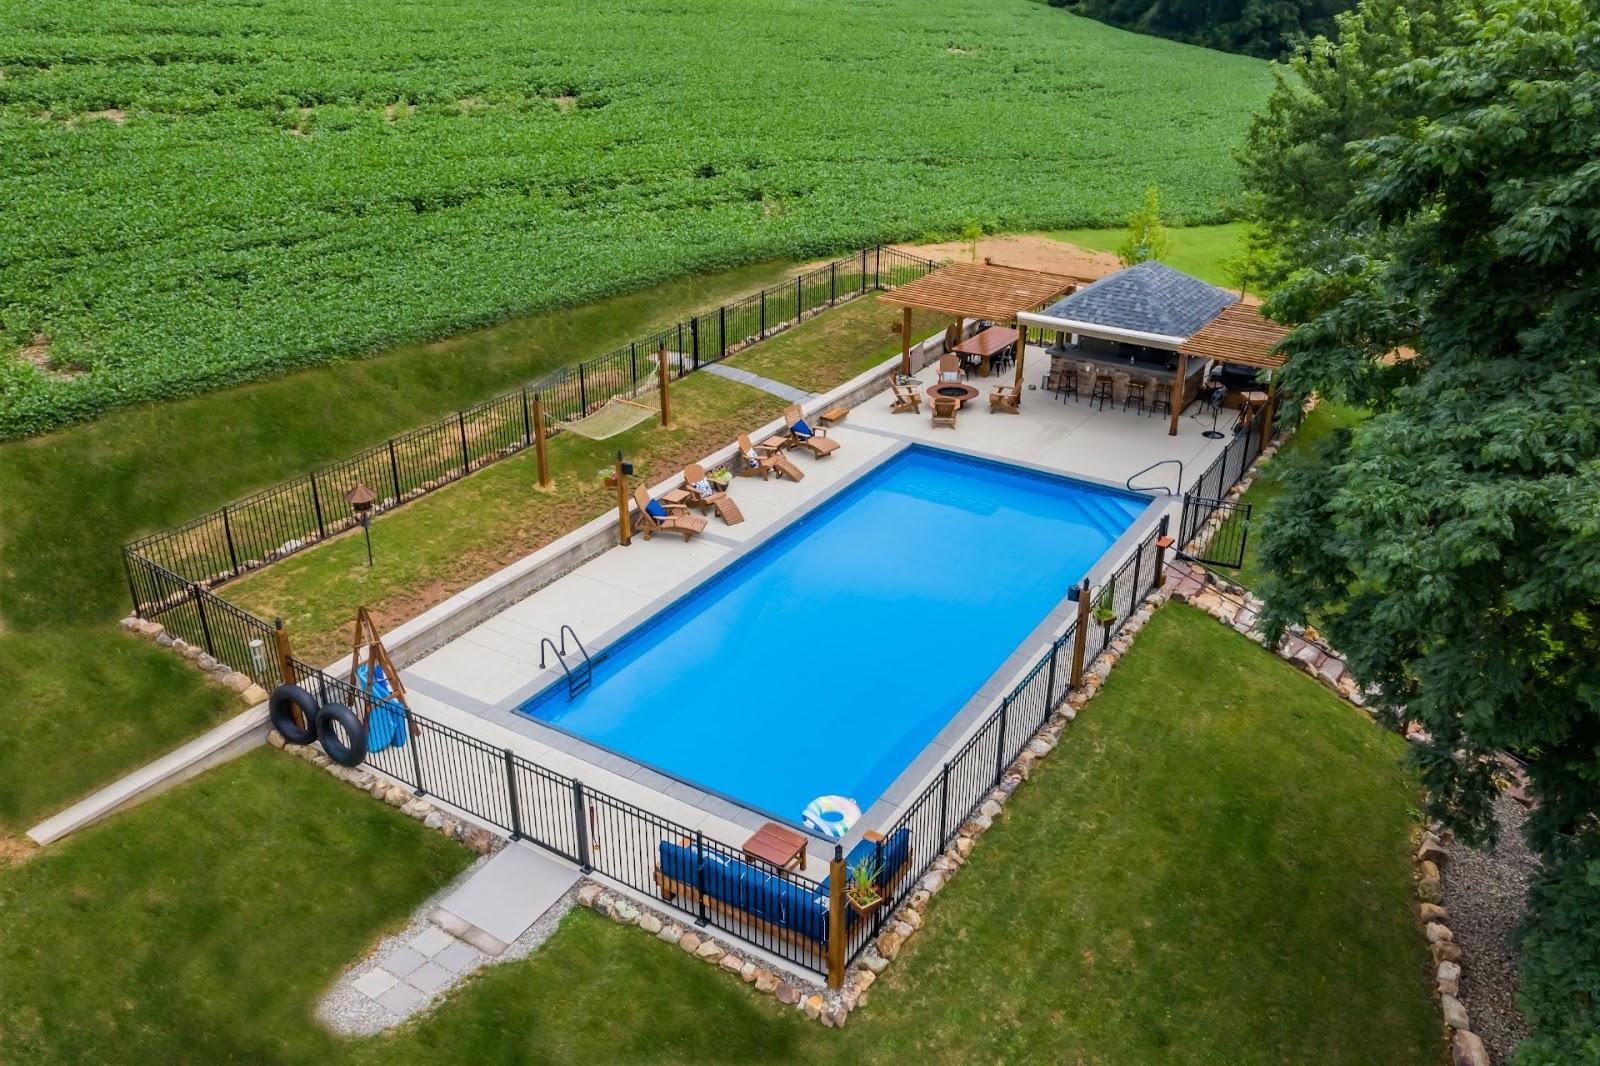 Professional Pool Opening vs. DIY: What's Best for You?